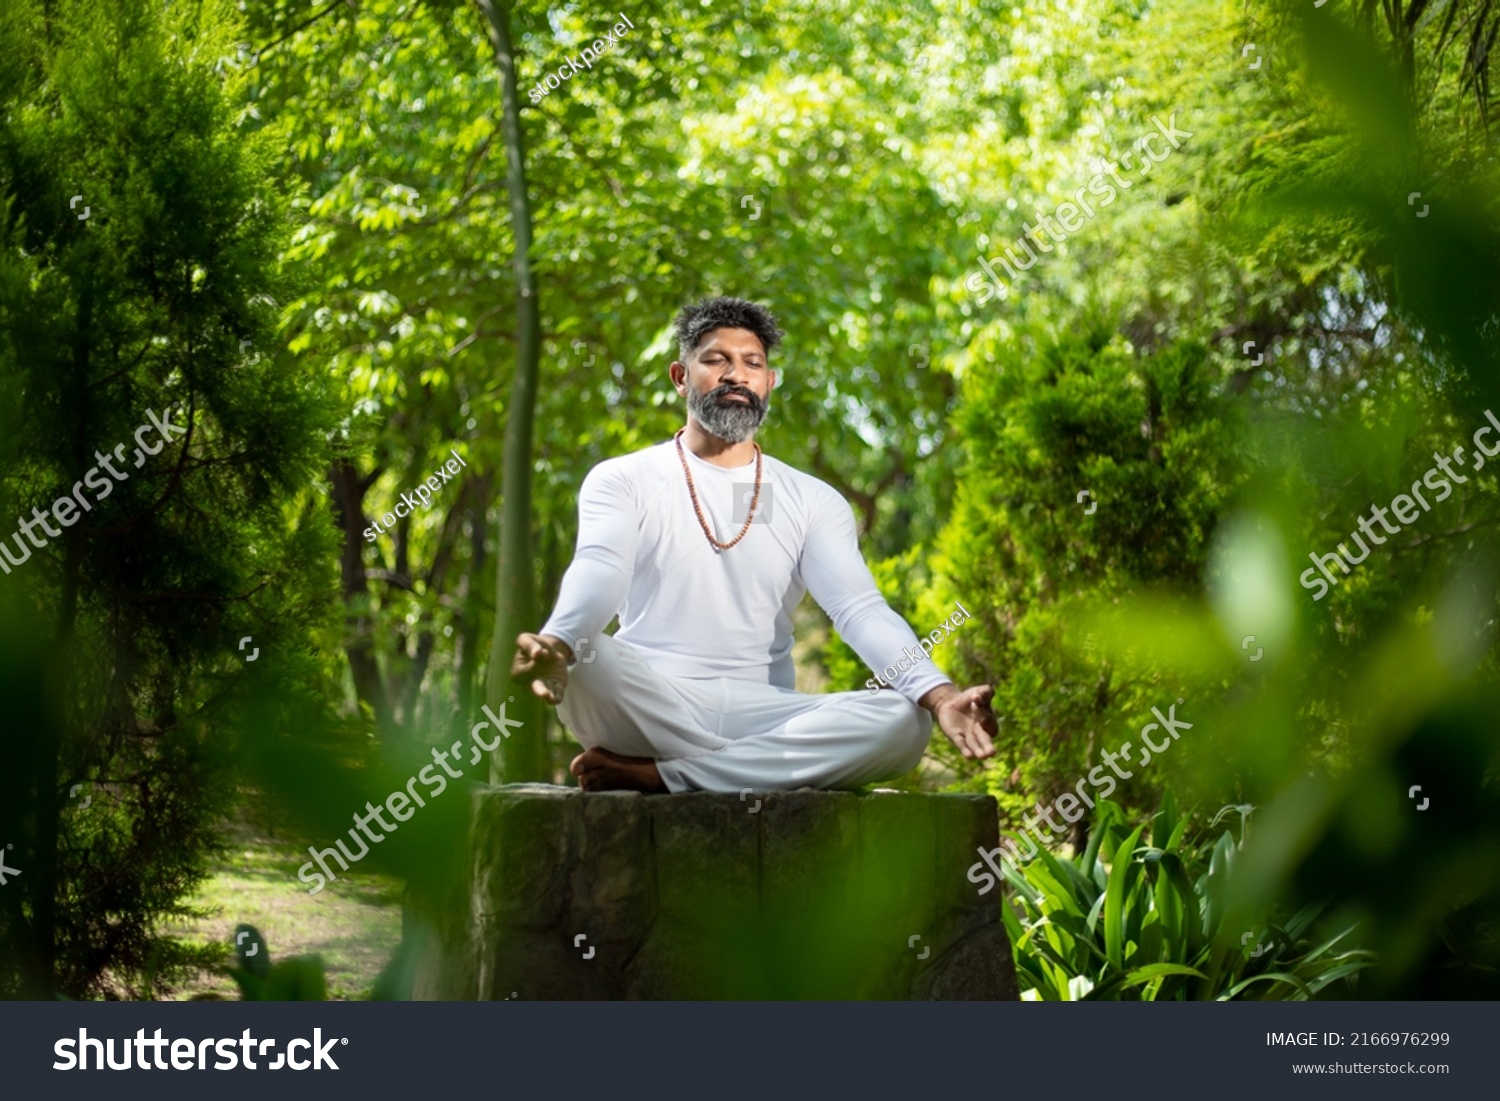 Indian man doing yoga meditation exercise in the green forest nature. fitness and yogi, healthy lifestyle. #2166976299